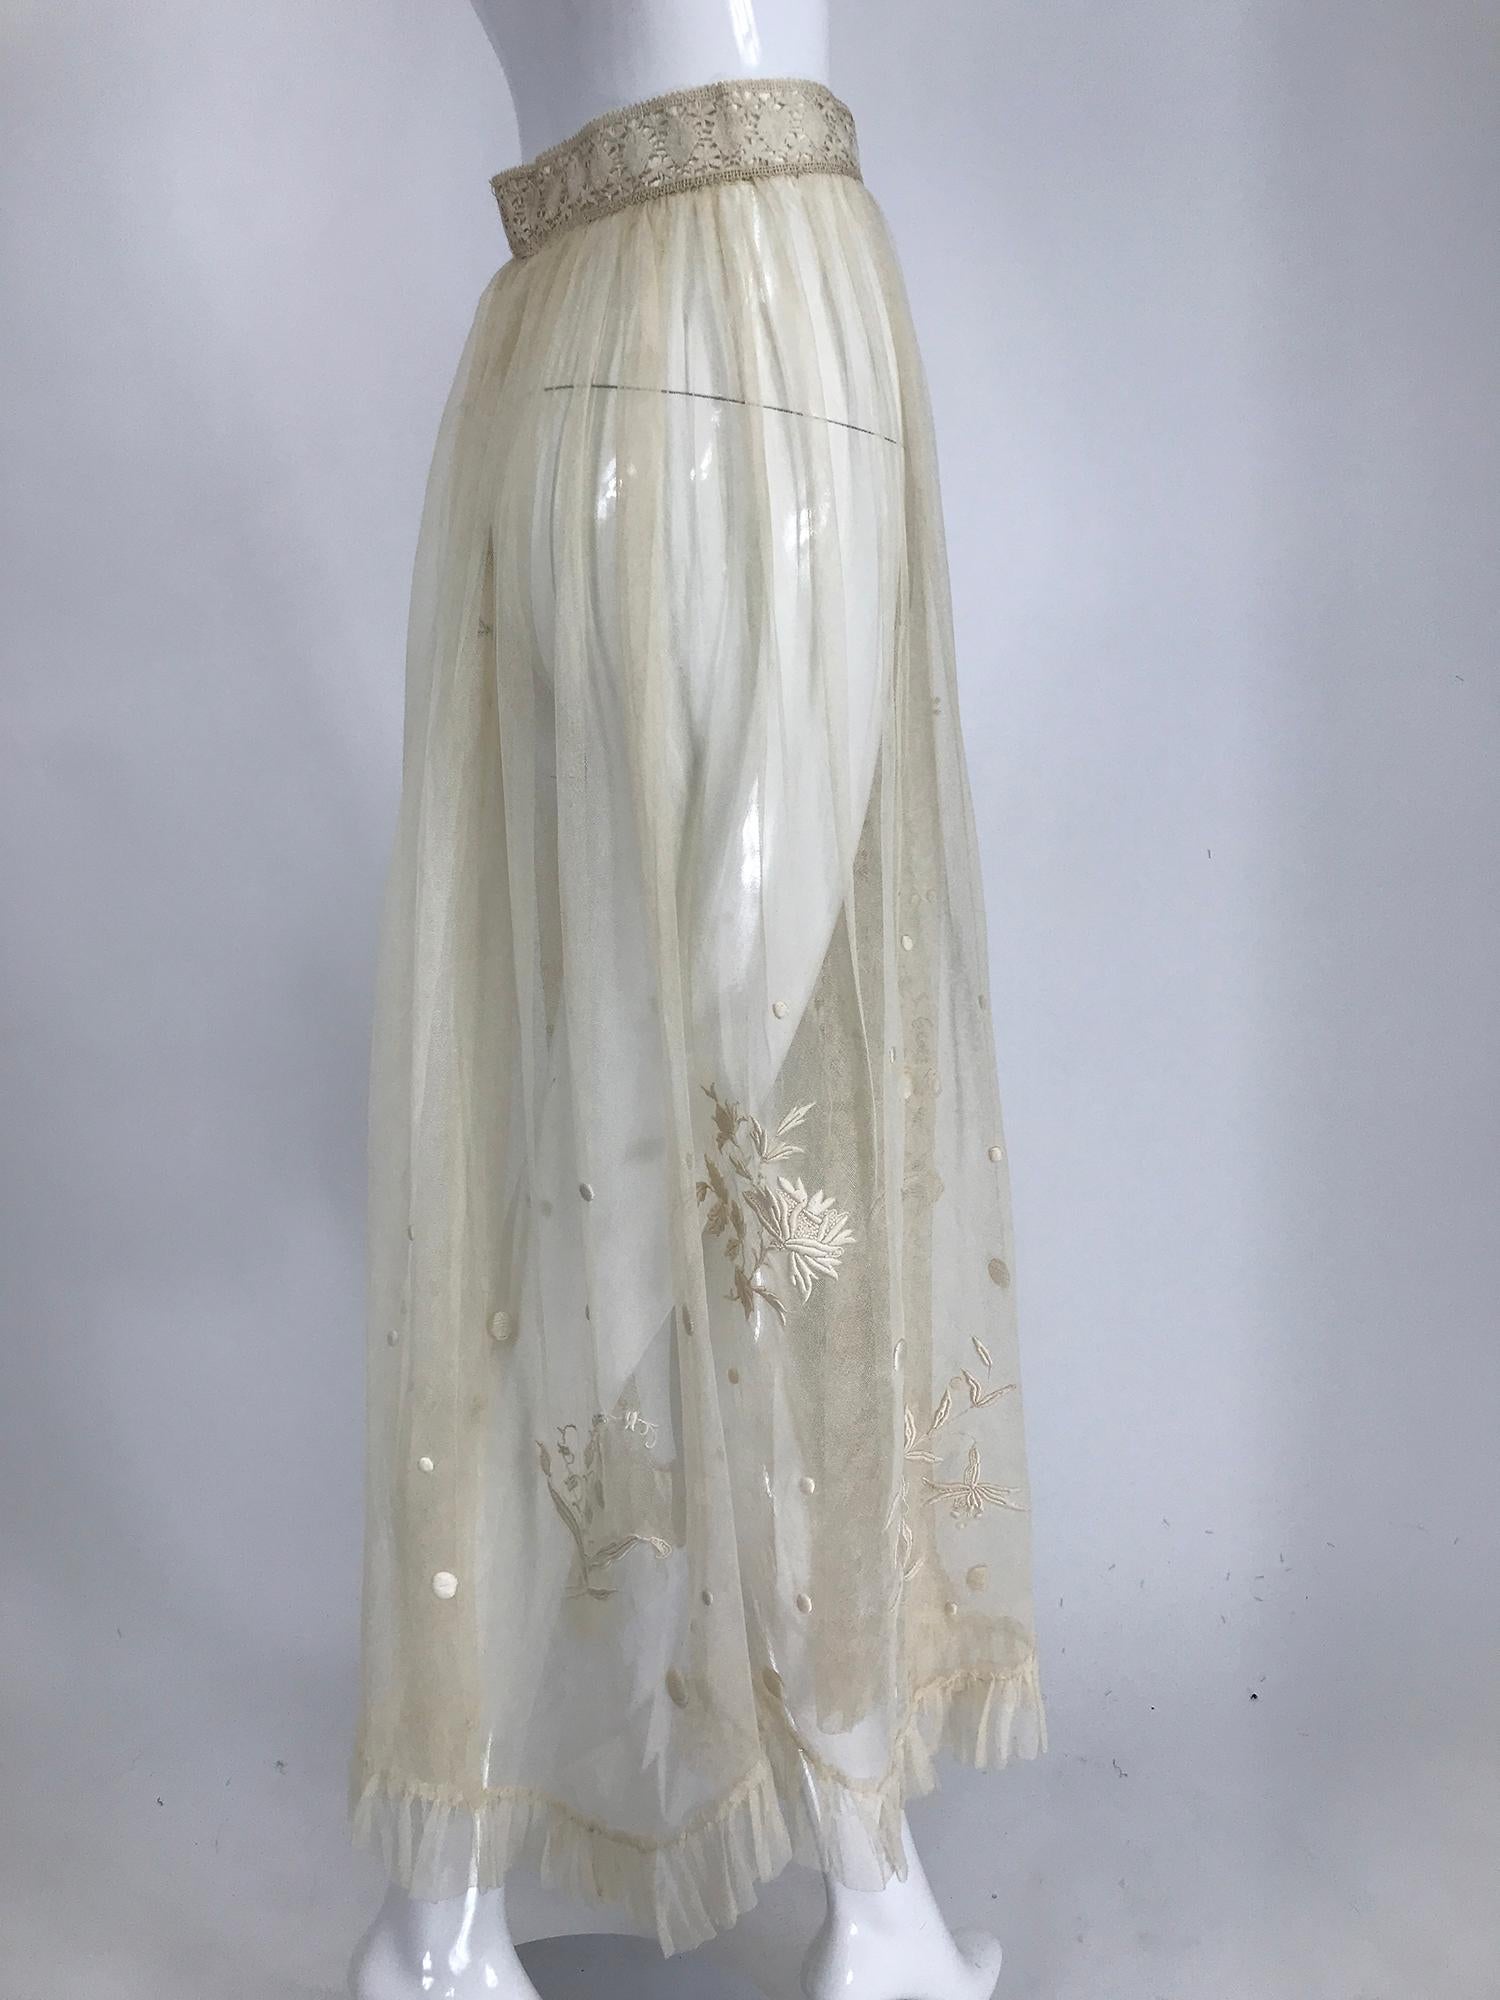 Edwardian Ecru Satin Stitch Embroidered Tulle Skirt 1900s For Sale 1